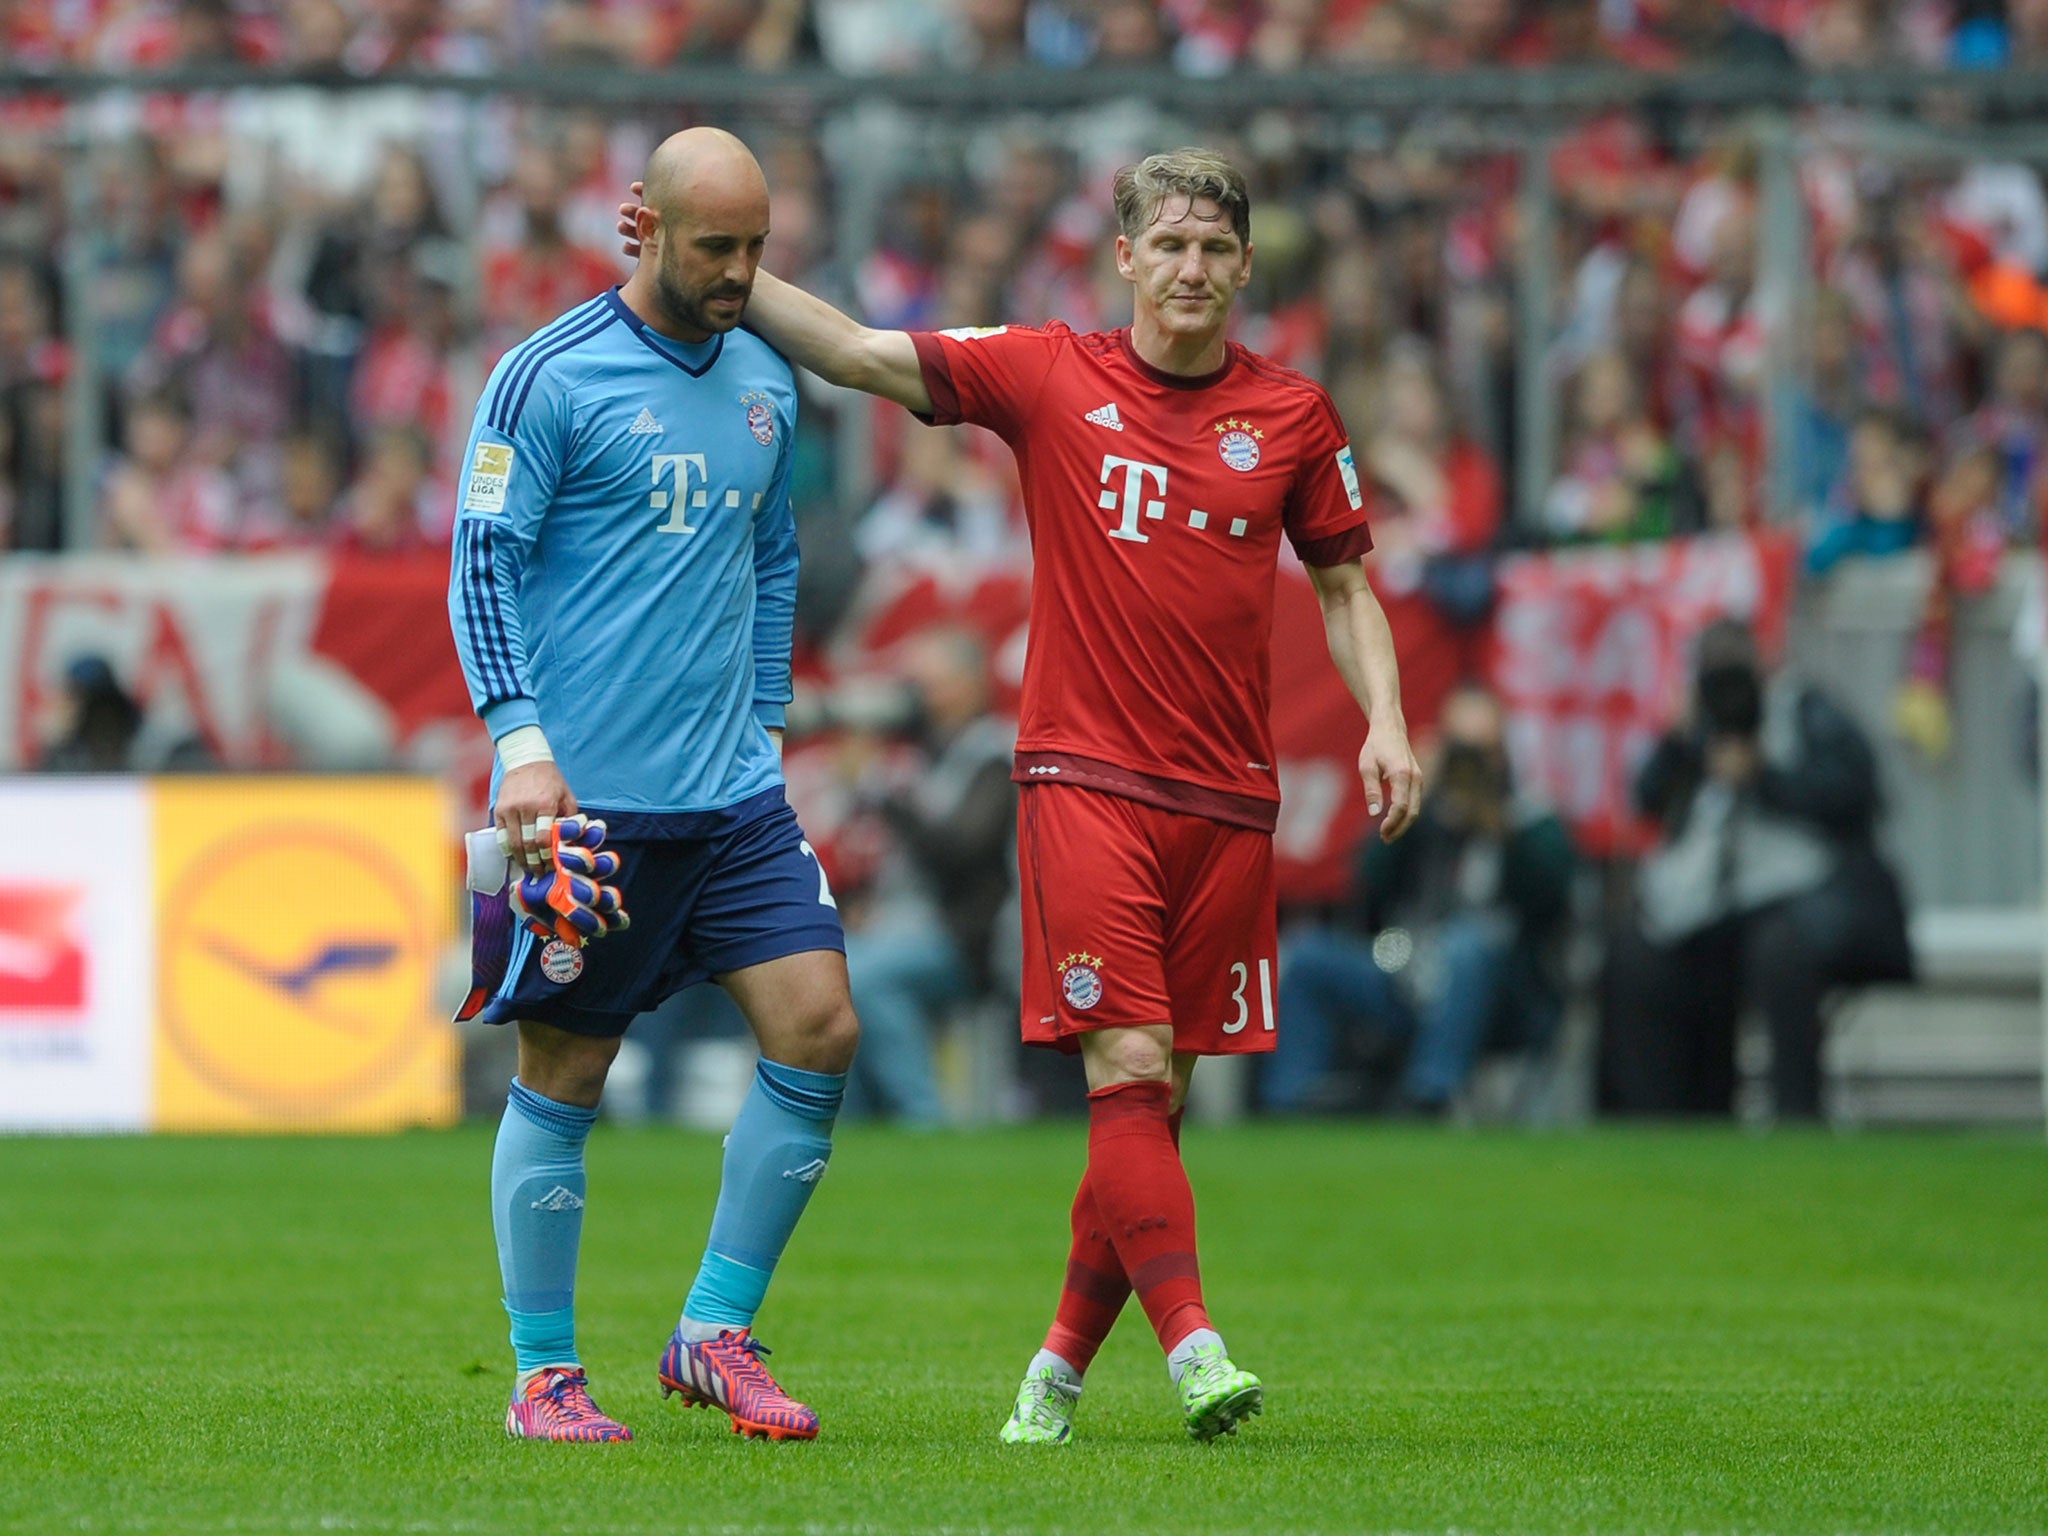 Pepe Reina is sent-off for Bayern Munich